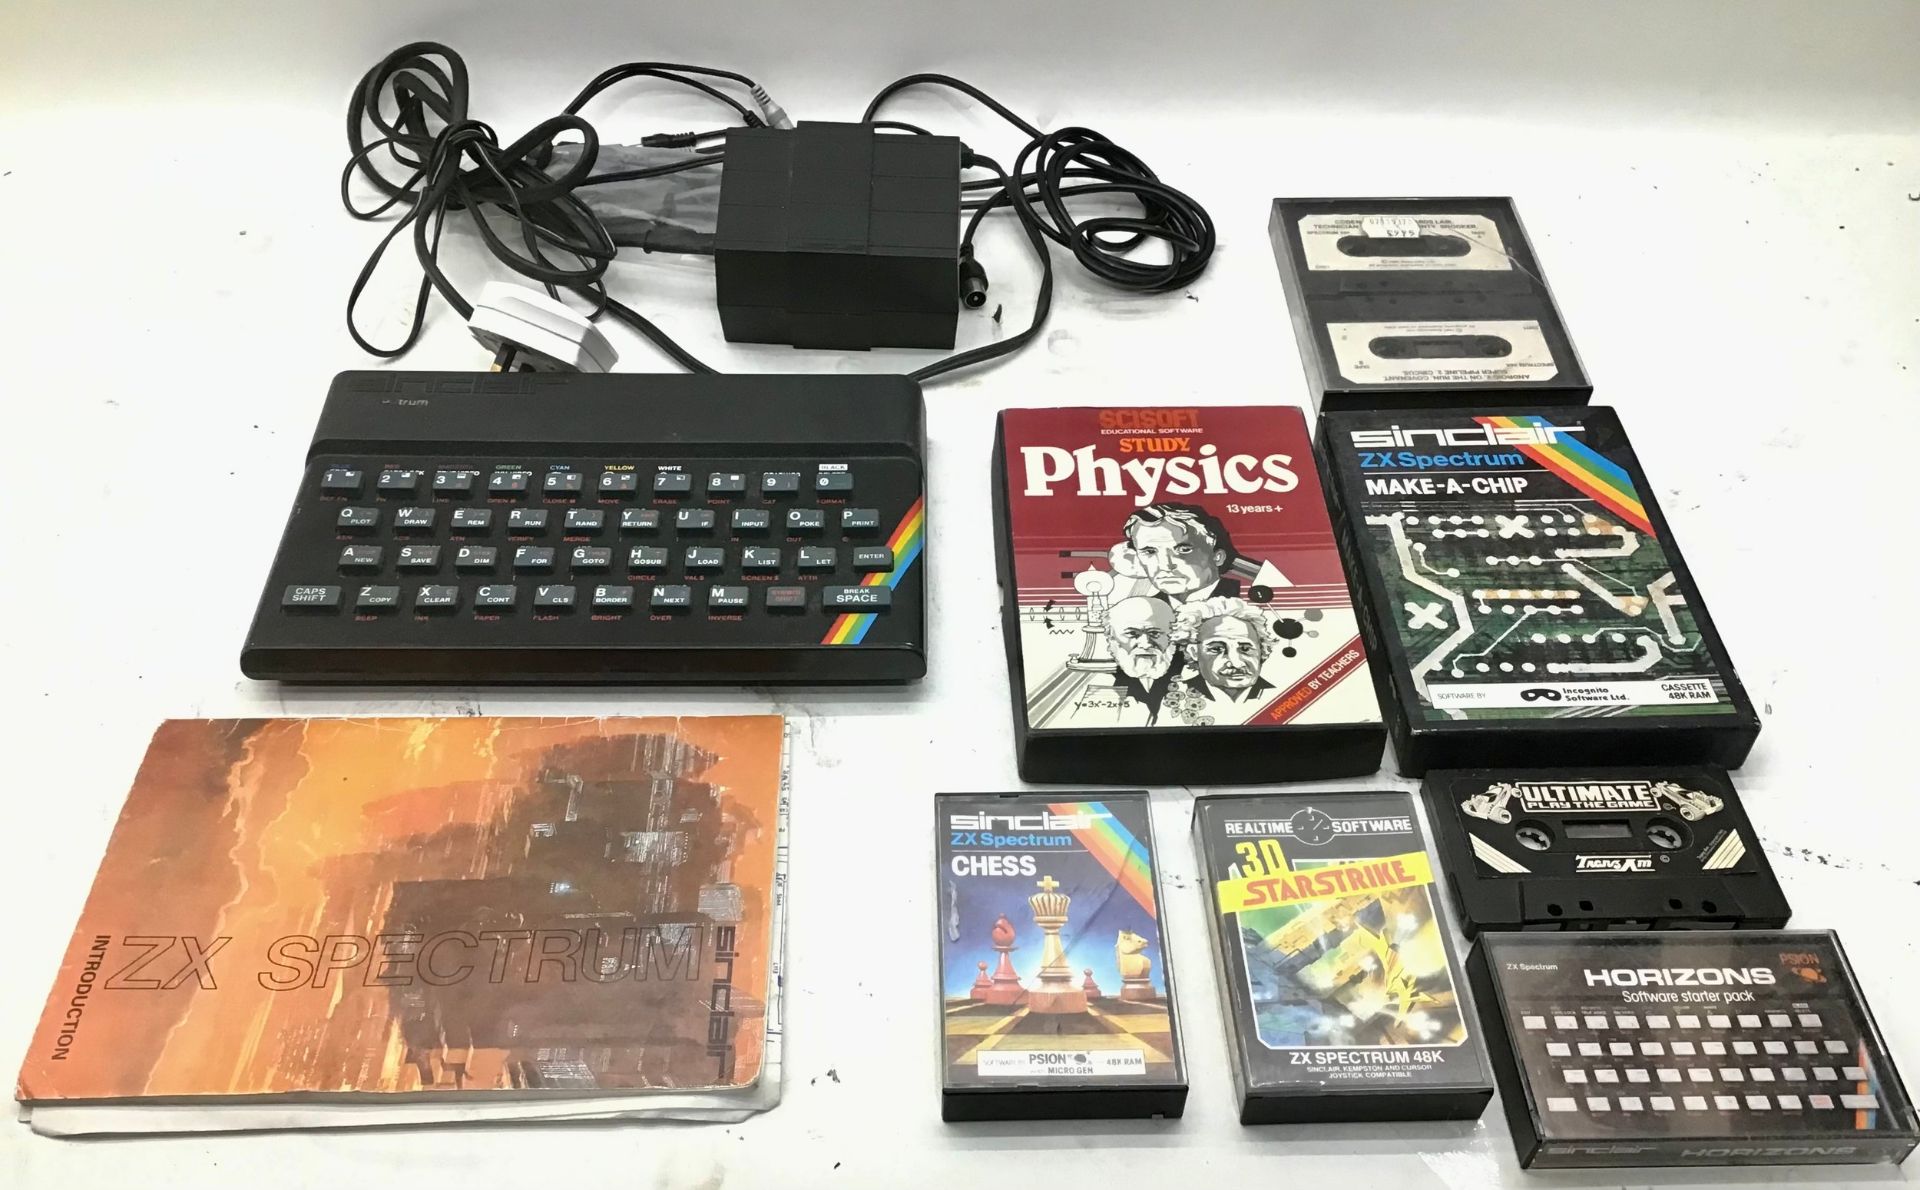 ZX SPECTRUM GAMES COMPUTER. Made by Spectrum in 1982 complete with leads and power supply. Also